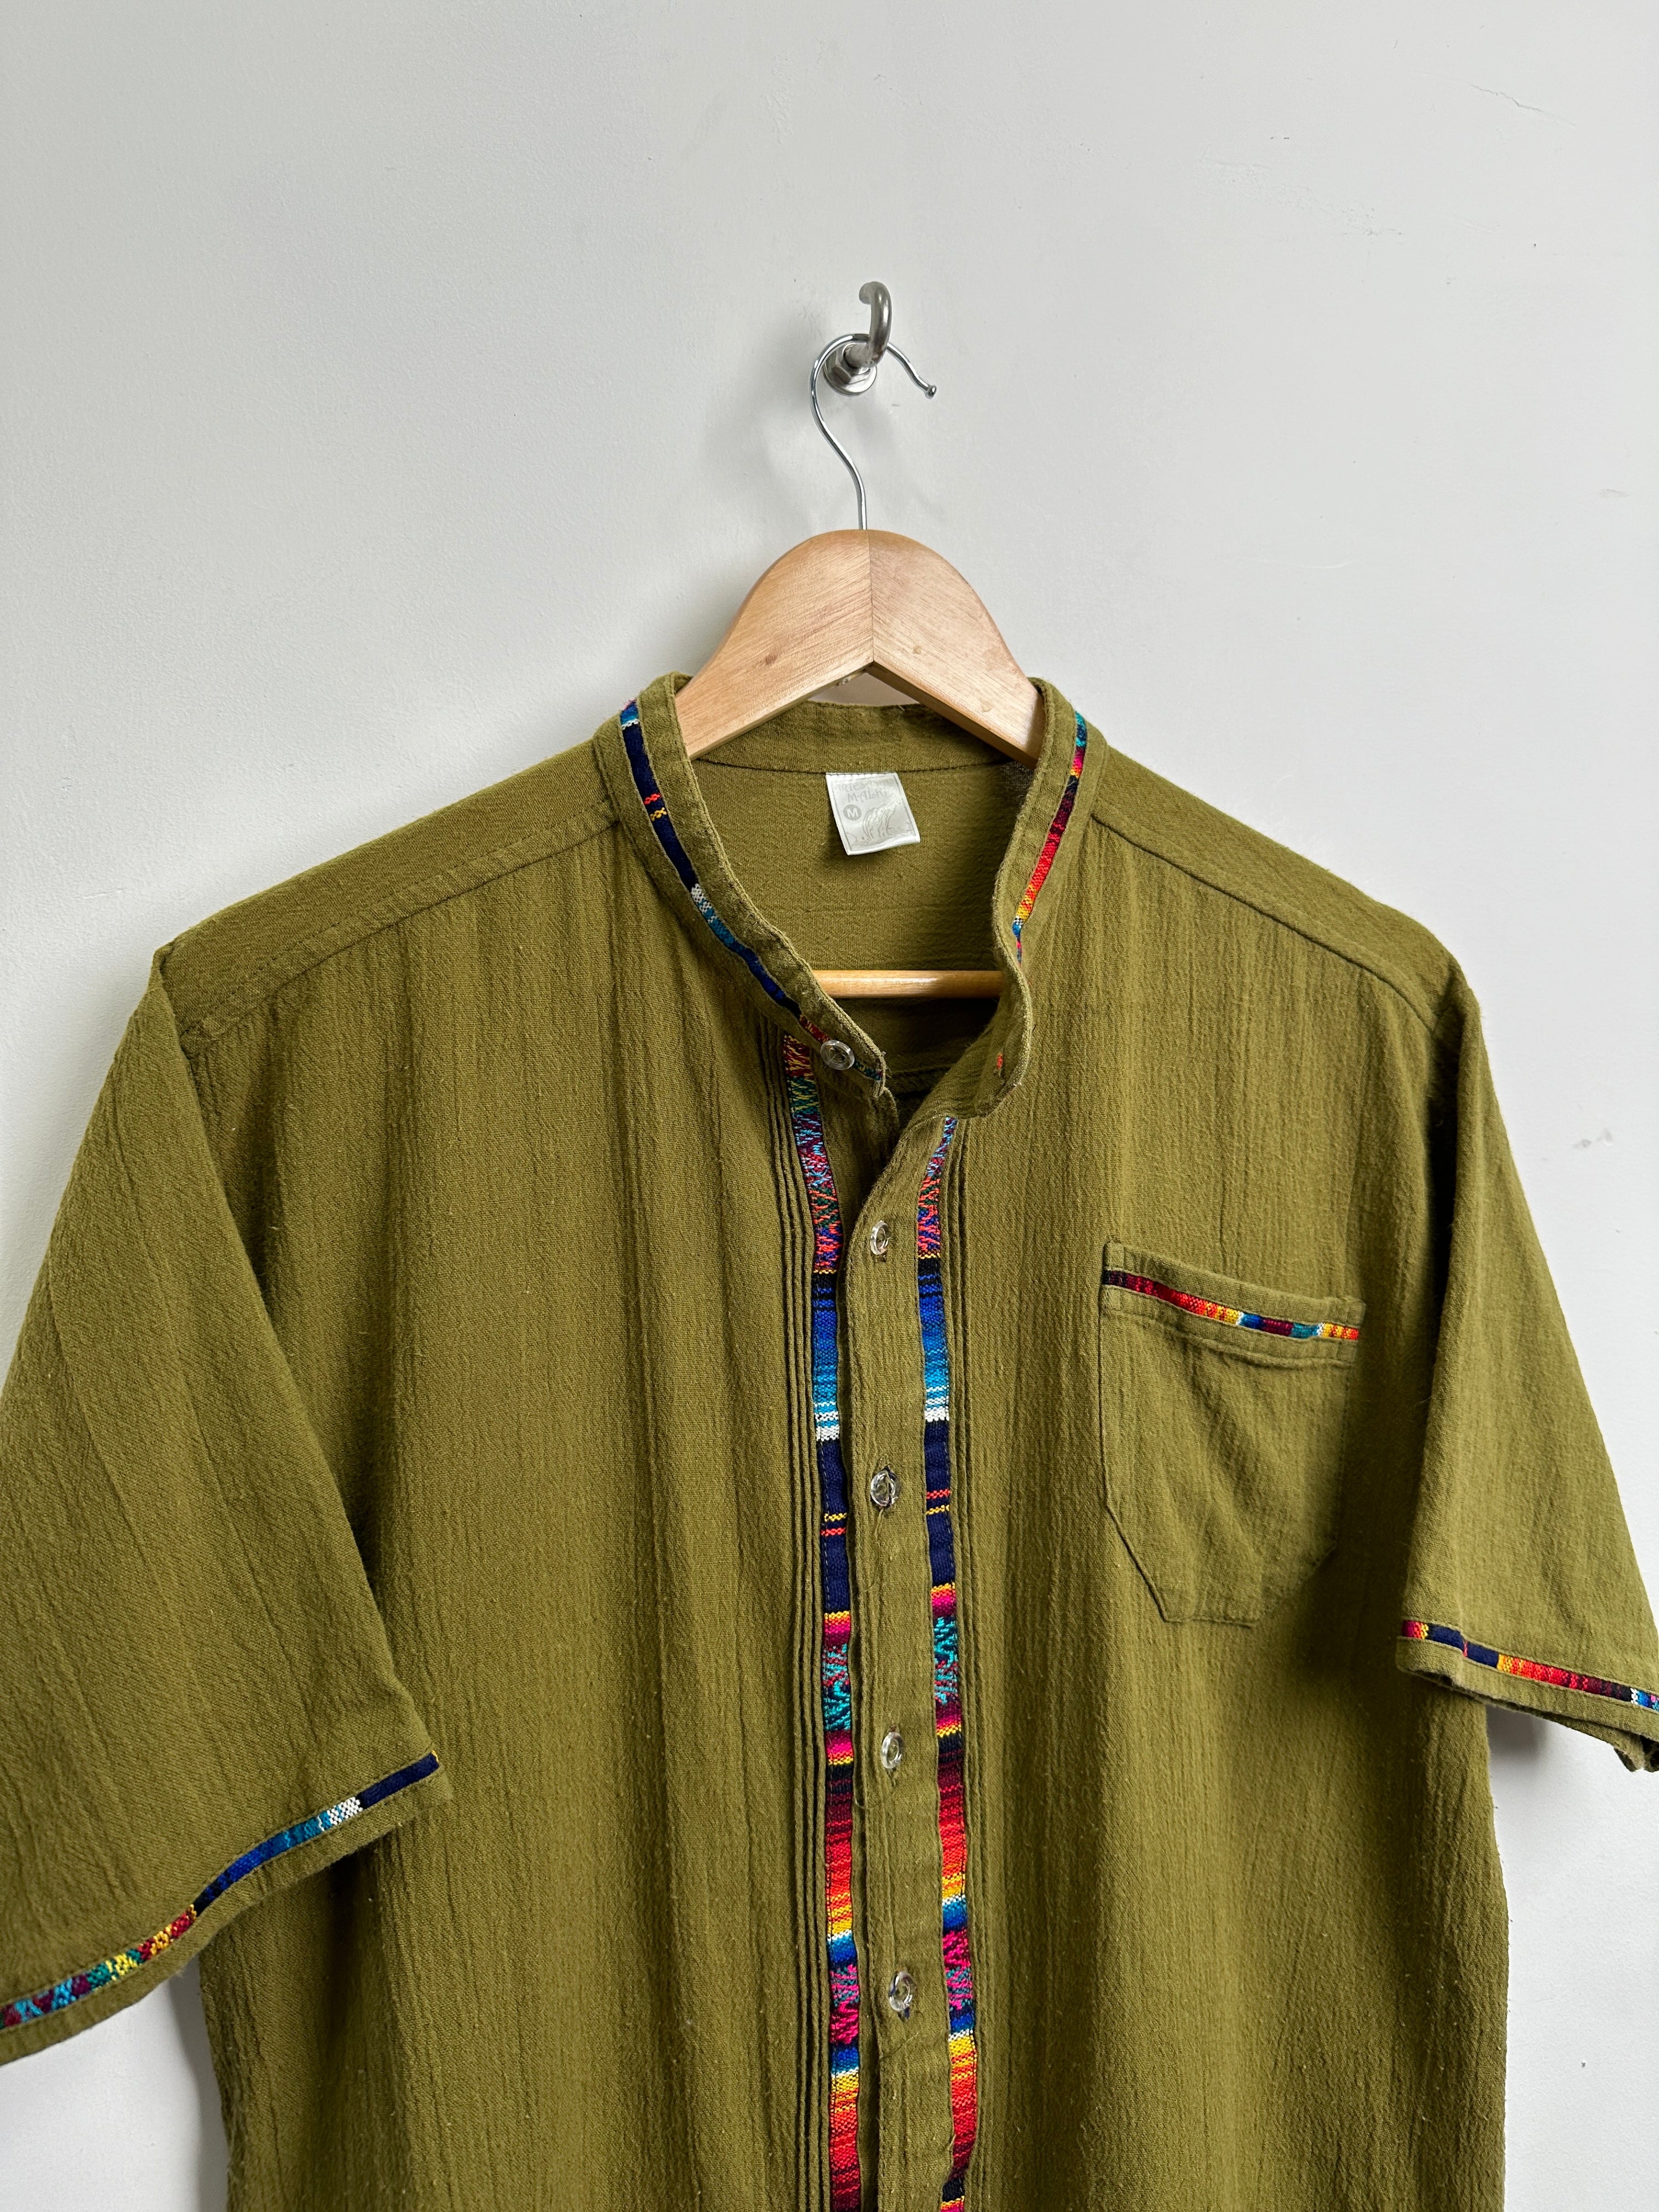 Vintage chinese collar shirt in green